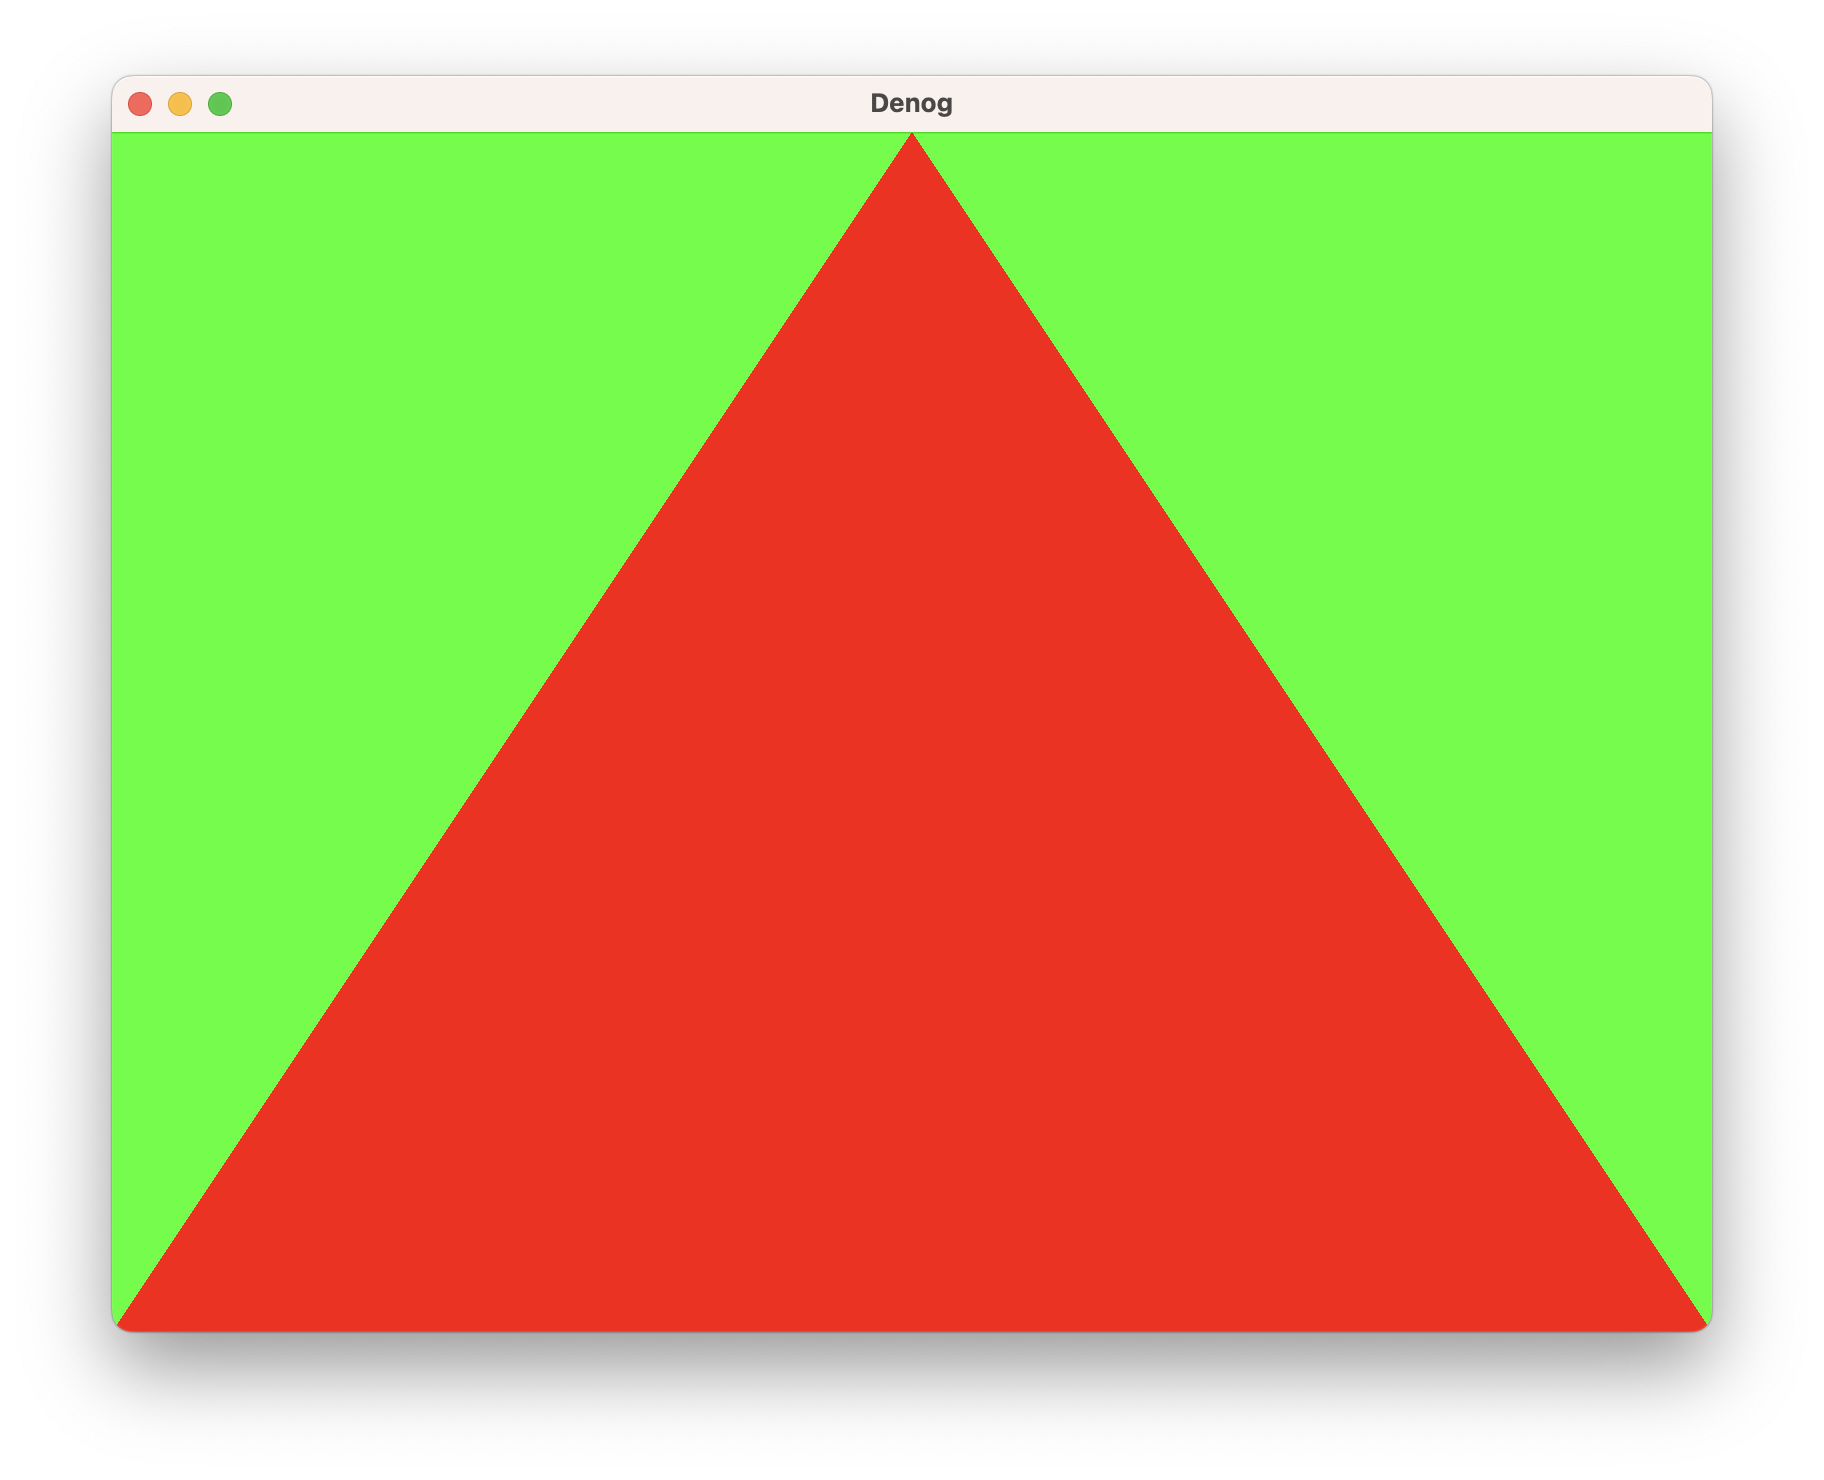 A red triangle over a green background.